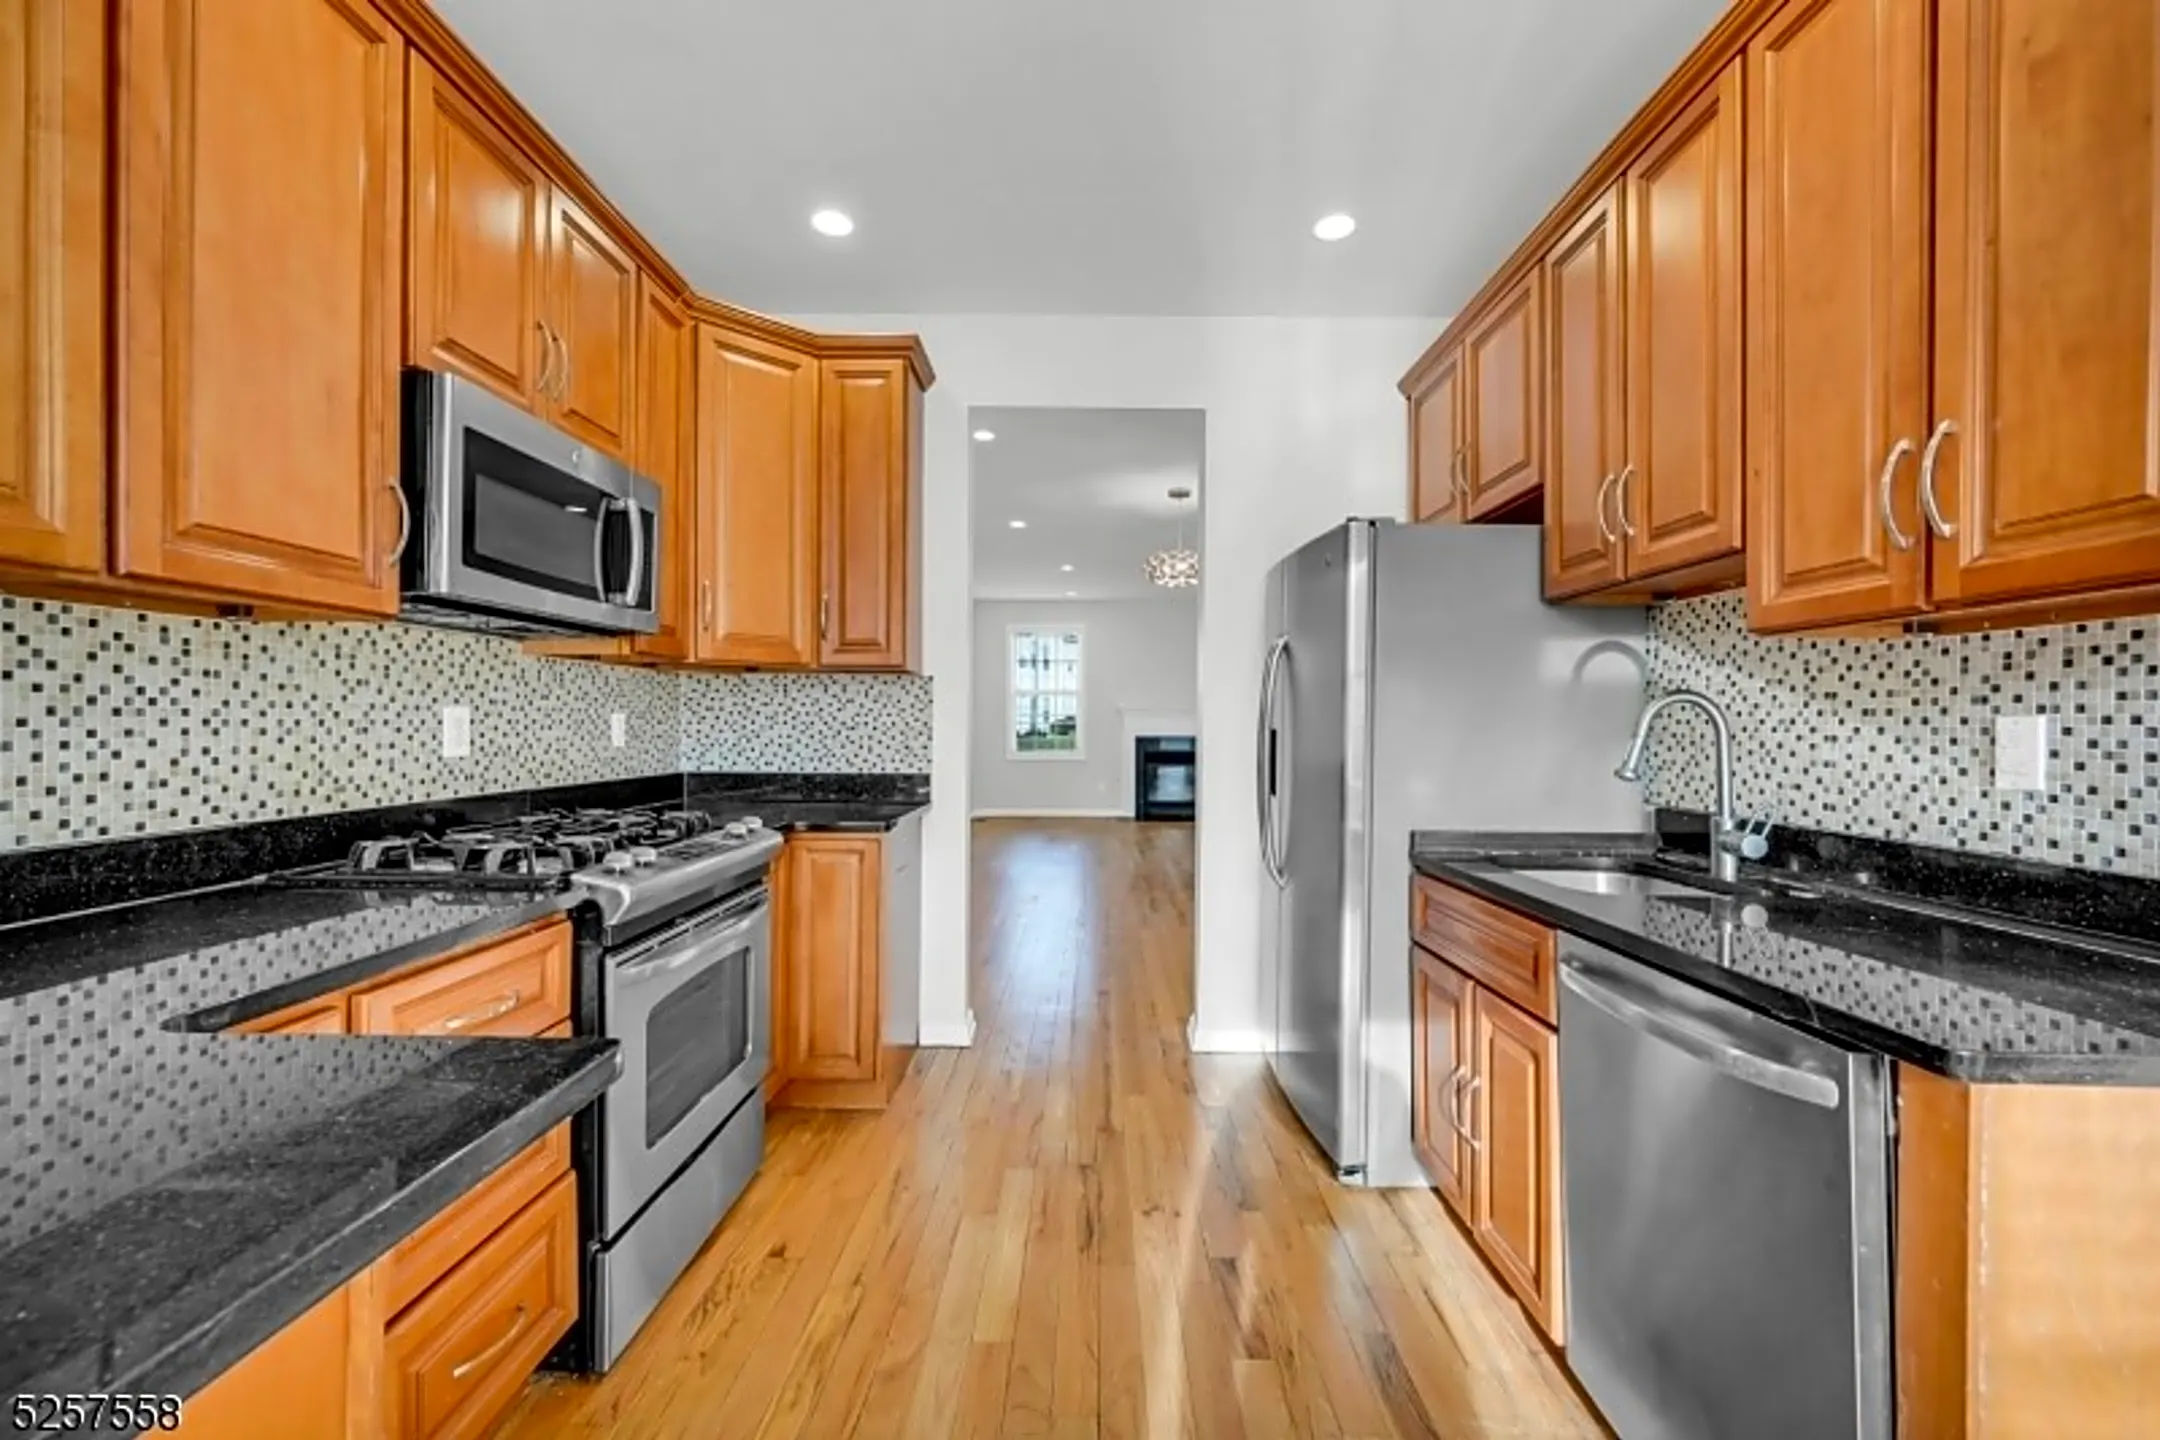 Kitchen - 518 Coventry Dr - Nutley, NJ